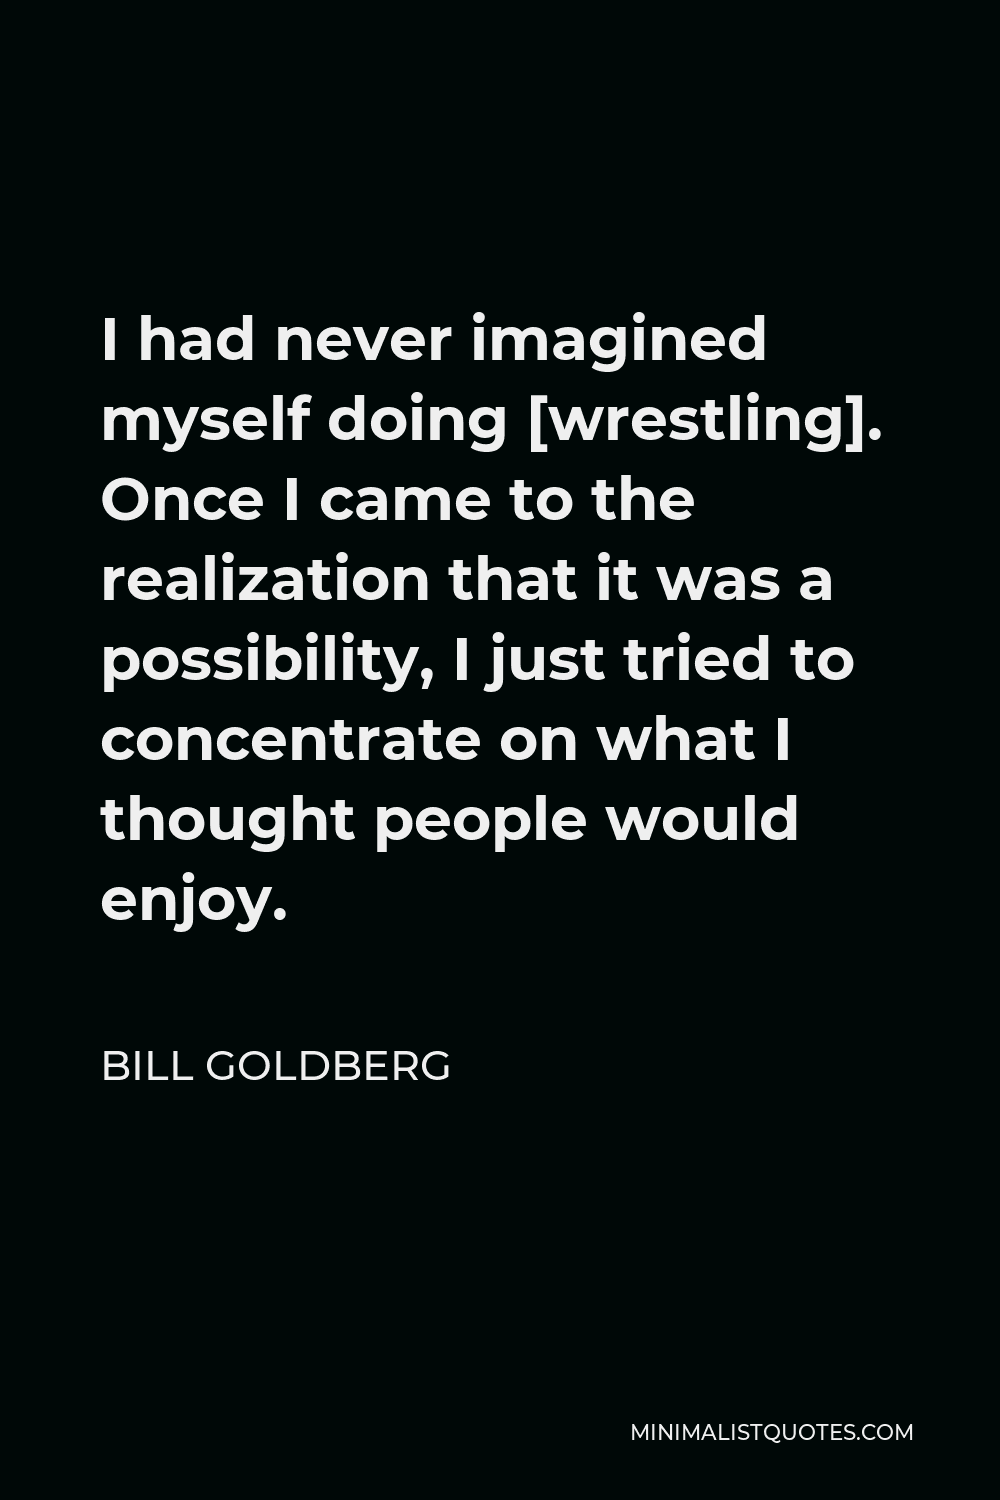 Bill Goldberg Quote - I had never imagined myself doing [wrestling]. Once I came to the realization that it was a possibility, I just tried to concentrate on what I thought people would enjoy.